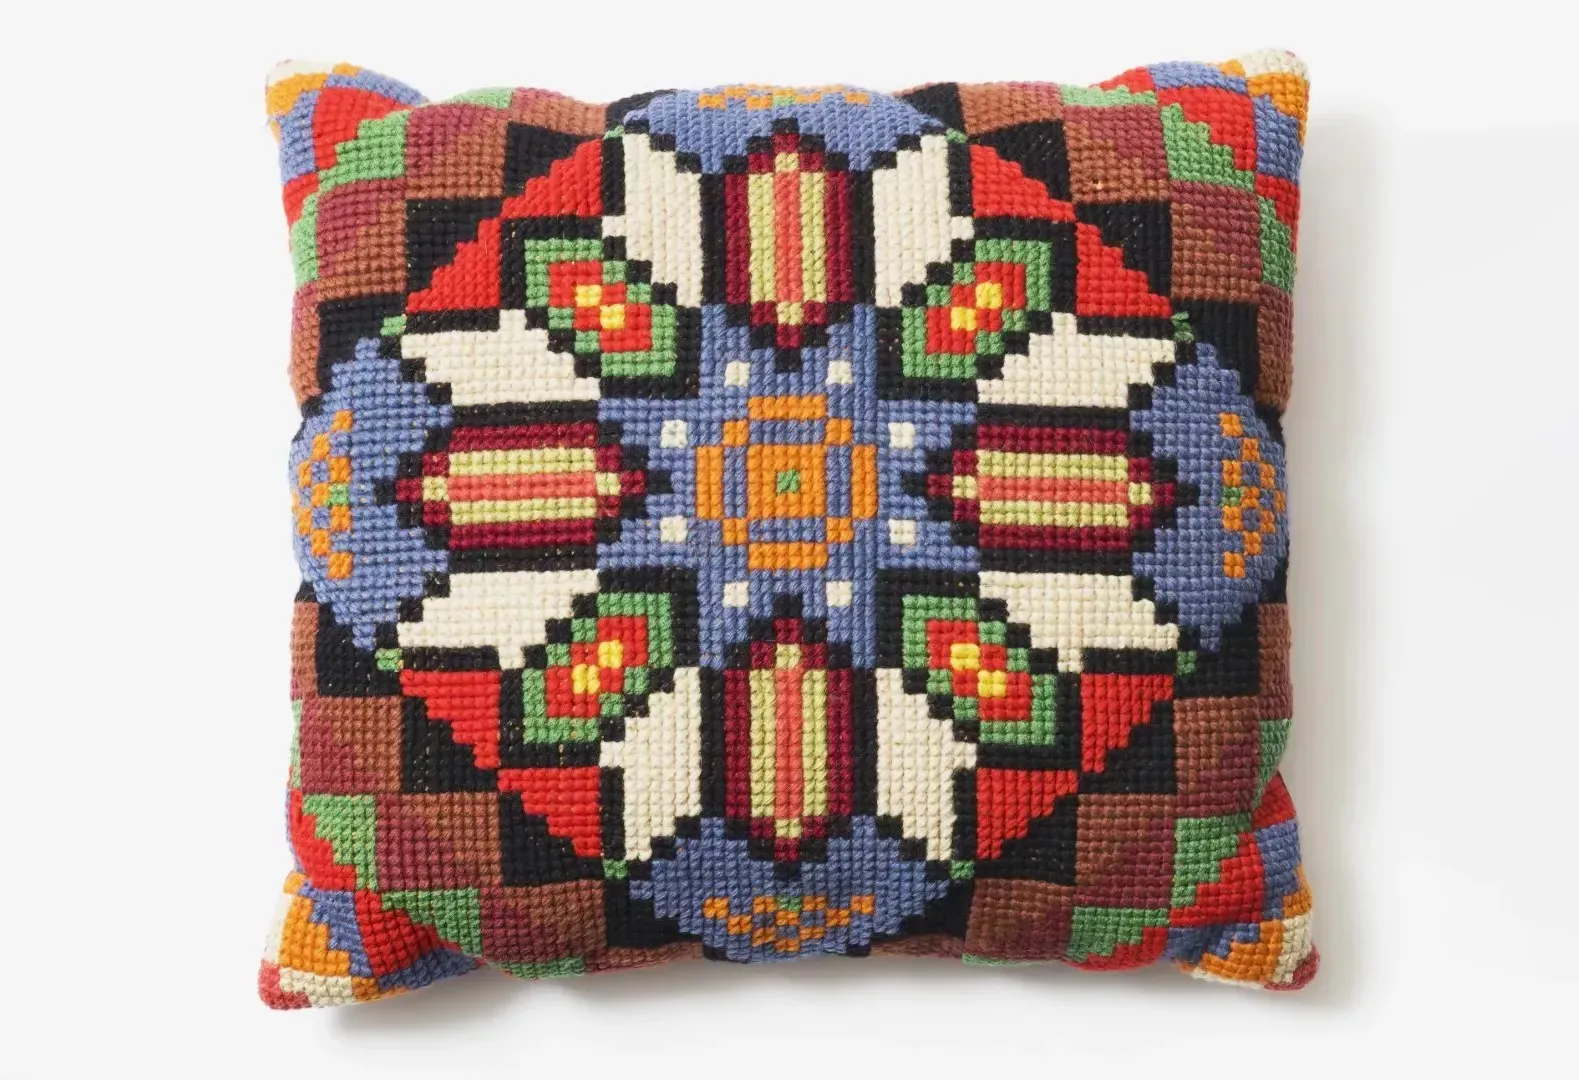 Embroidered cushion gifted to Arthur Calwell